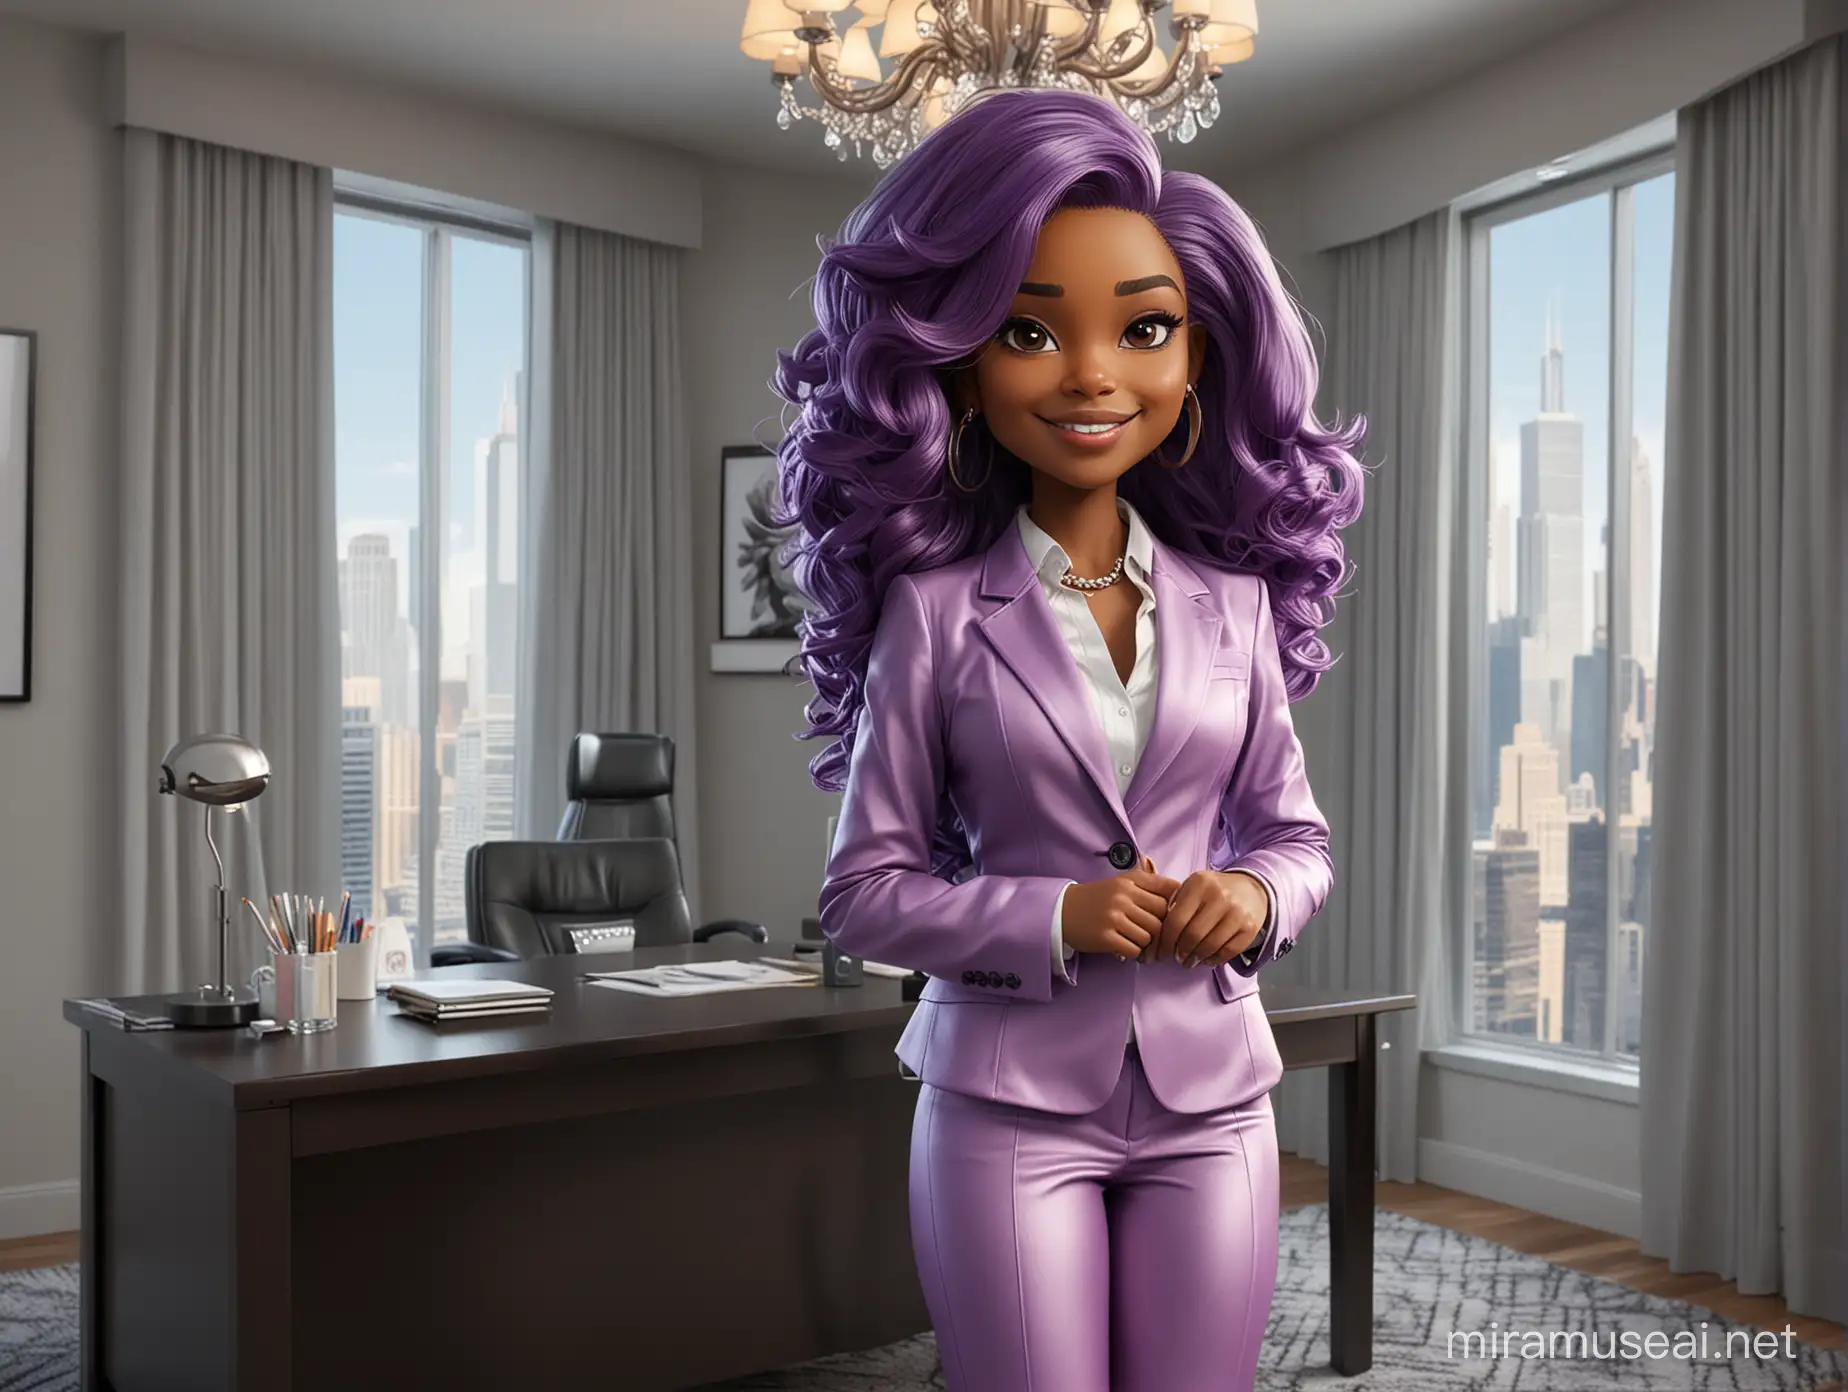 Create a 8k enhance the realism airbrush 300 dpi with 5d chibi-style, professional smiling African American woman working at a. She has long voluminous purple hair, and is wearing a fitted, Chanel purple suit and classic heels. Her makeup features full eyelashes, grey eyeshadow, and glossy lips, complementing her pensive expression as she leans on one hand. Chicago skyscrapers and direct sunlight surrounding her. The artwork has a 10x10 aspect ratio and is set against a intricately detailed office, chandelier and grey curtains designed for clip art usage.